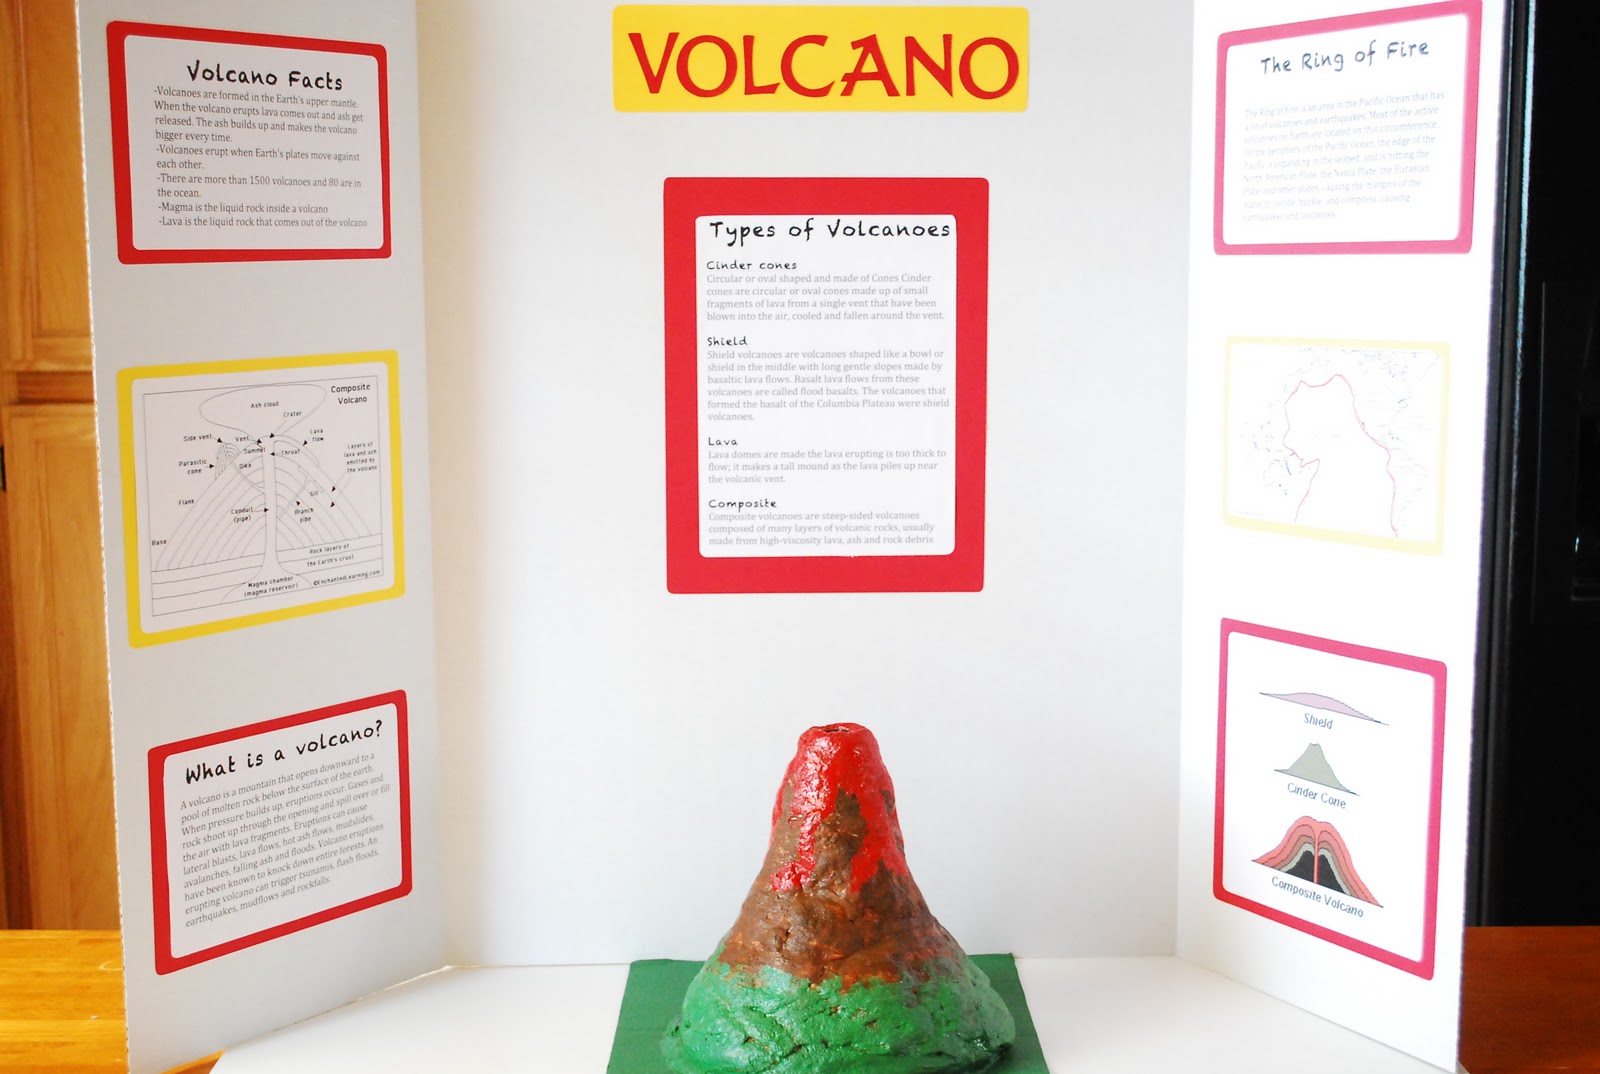 A science report on volcanoes